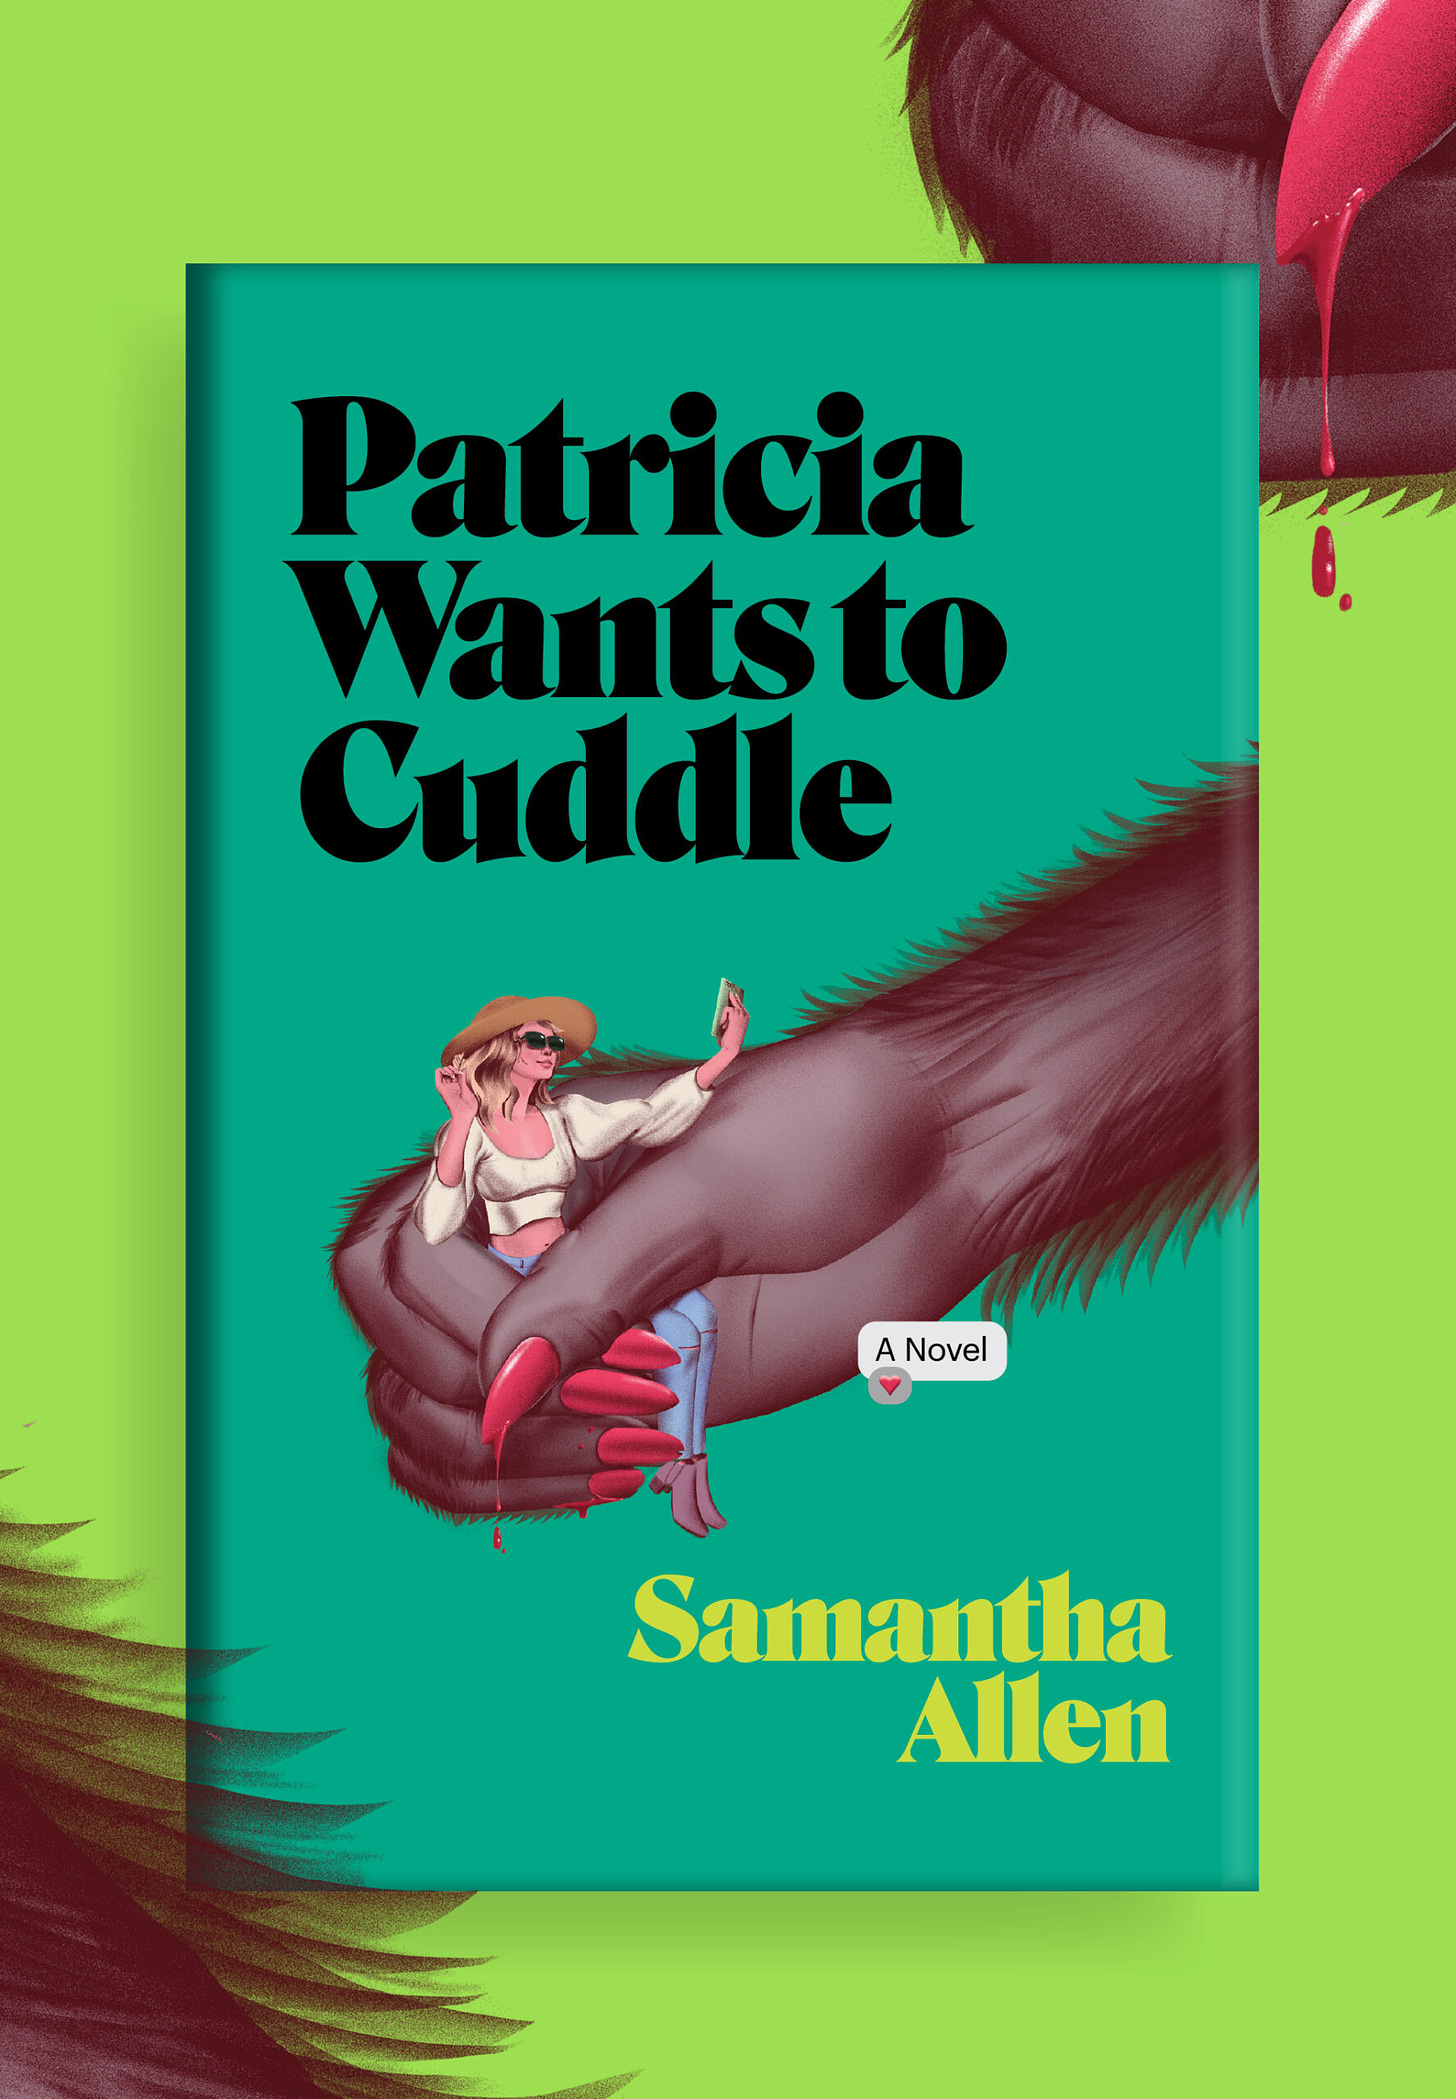 The cover of Patricia Wants to Cuddle. Against a mint green backdrop, an influencer is clutched in a large ape's hand with dripping red fingernail polish.